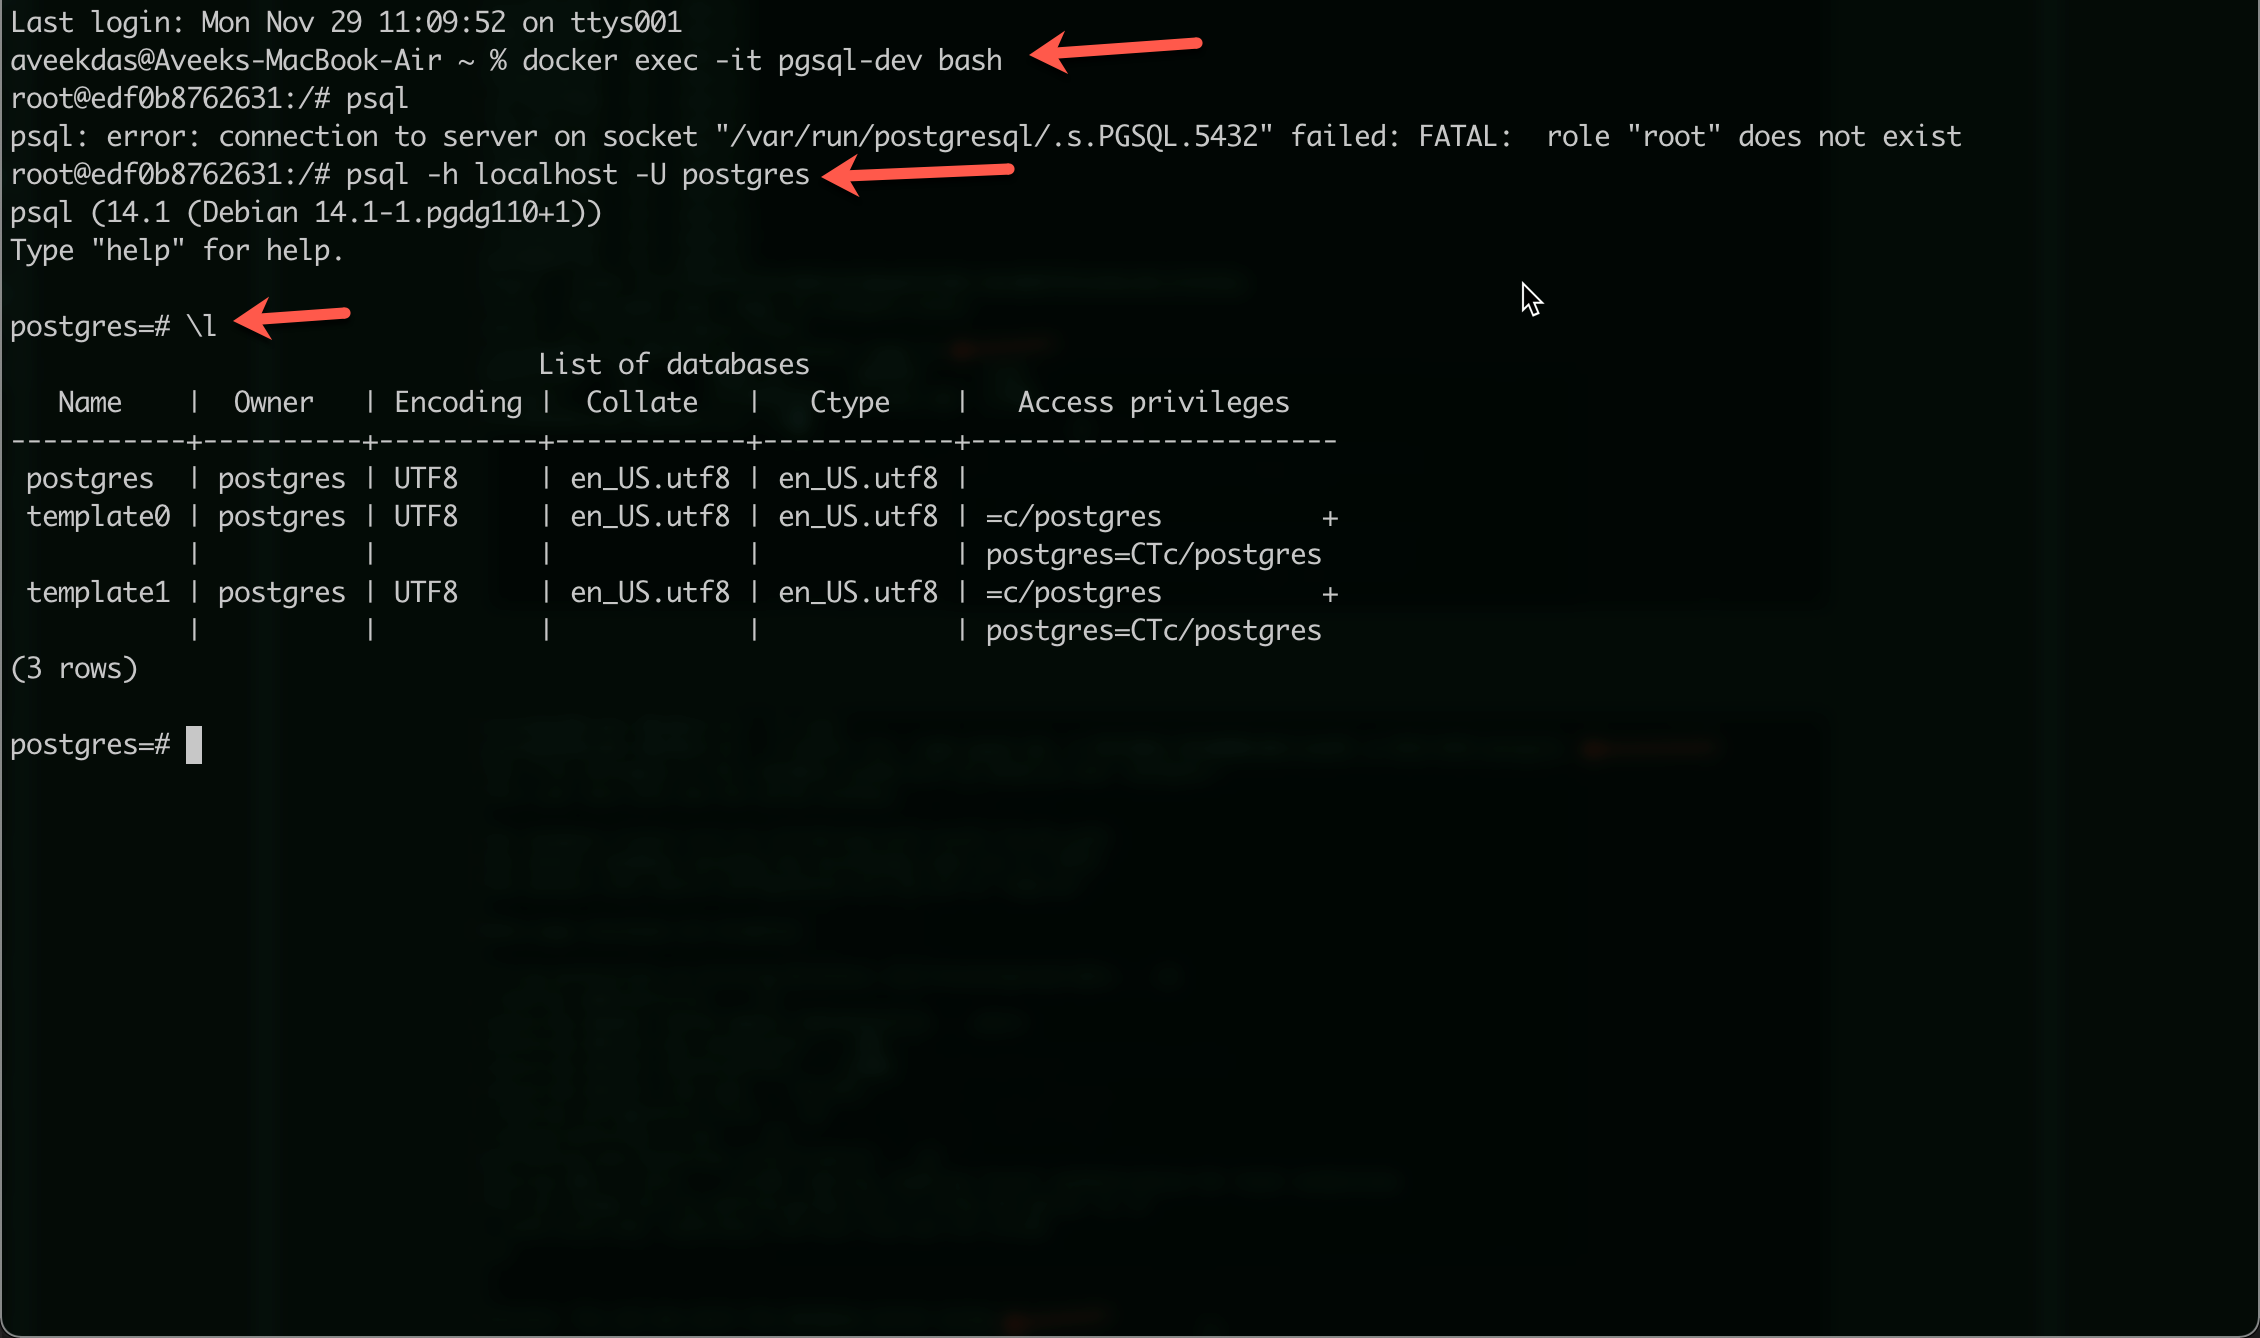 Interacting with the PSQL command line utility from terminal